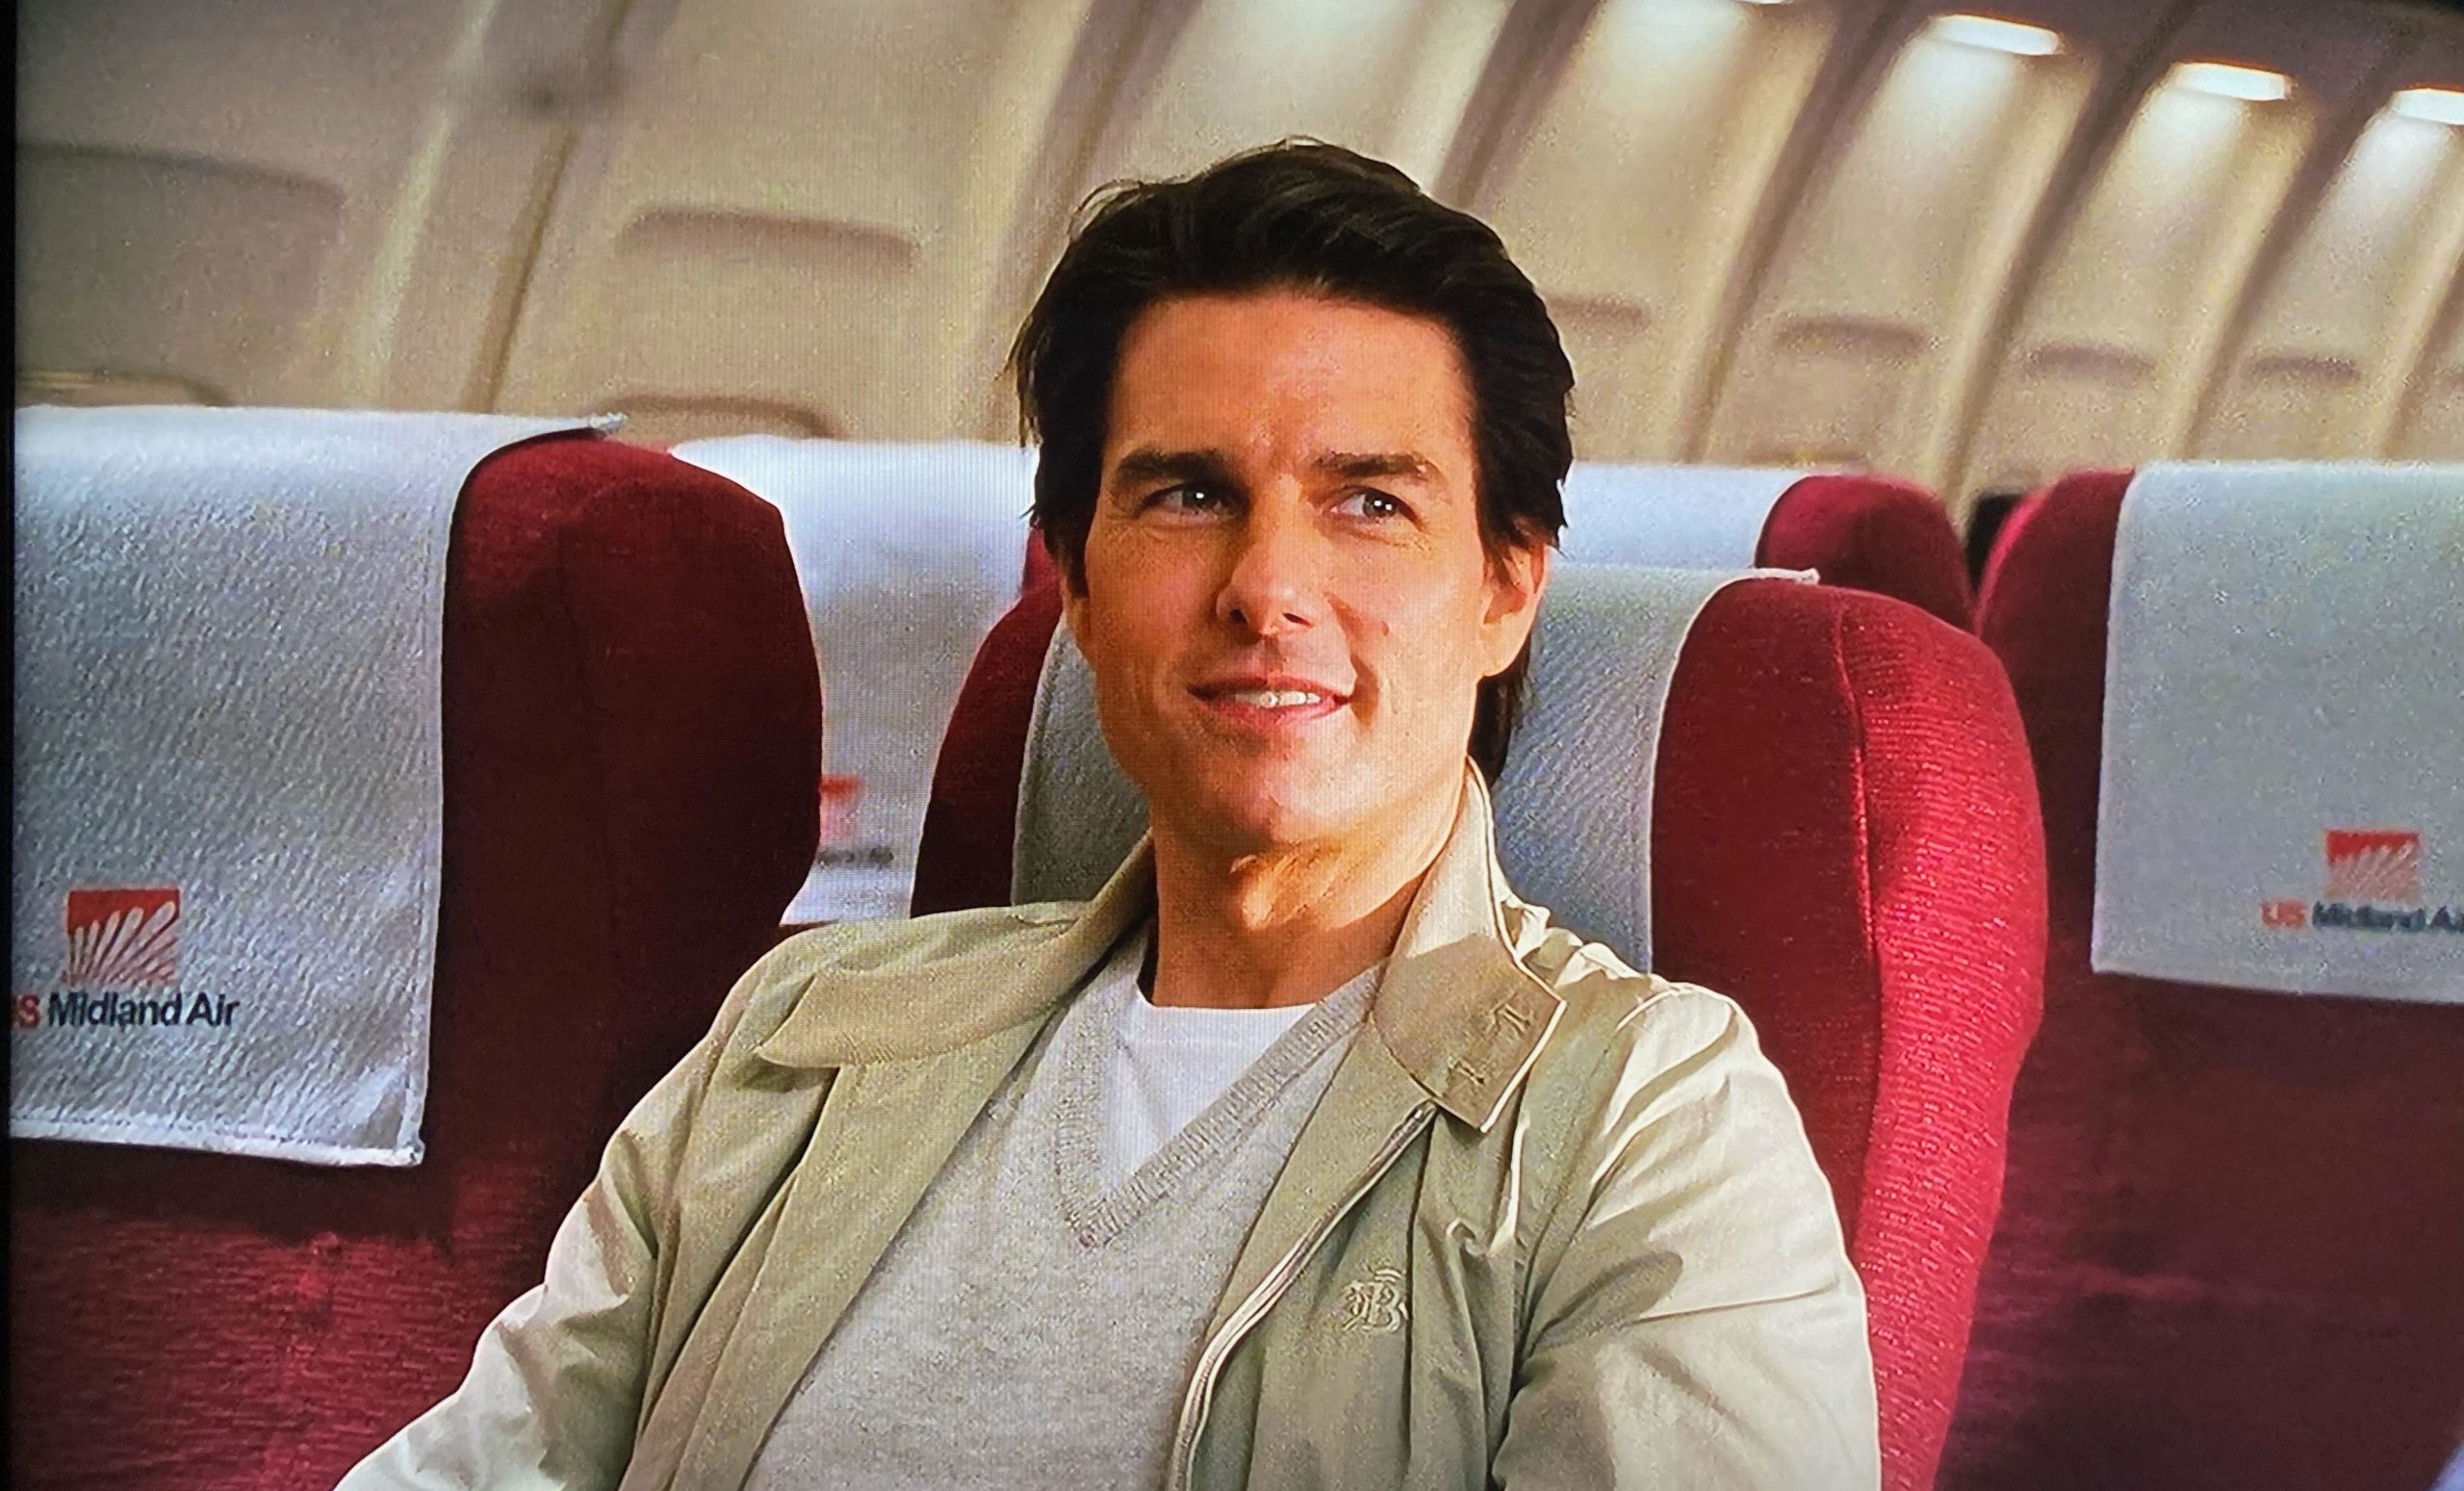 Baracuta jacket on Tom Cruise in Knight and Day sitting on a plane